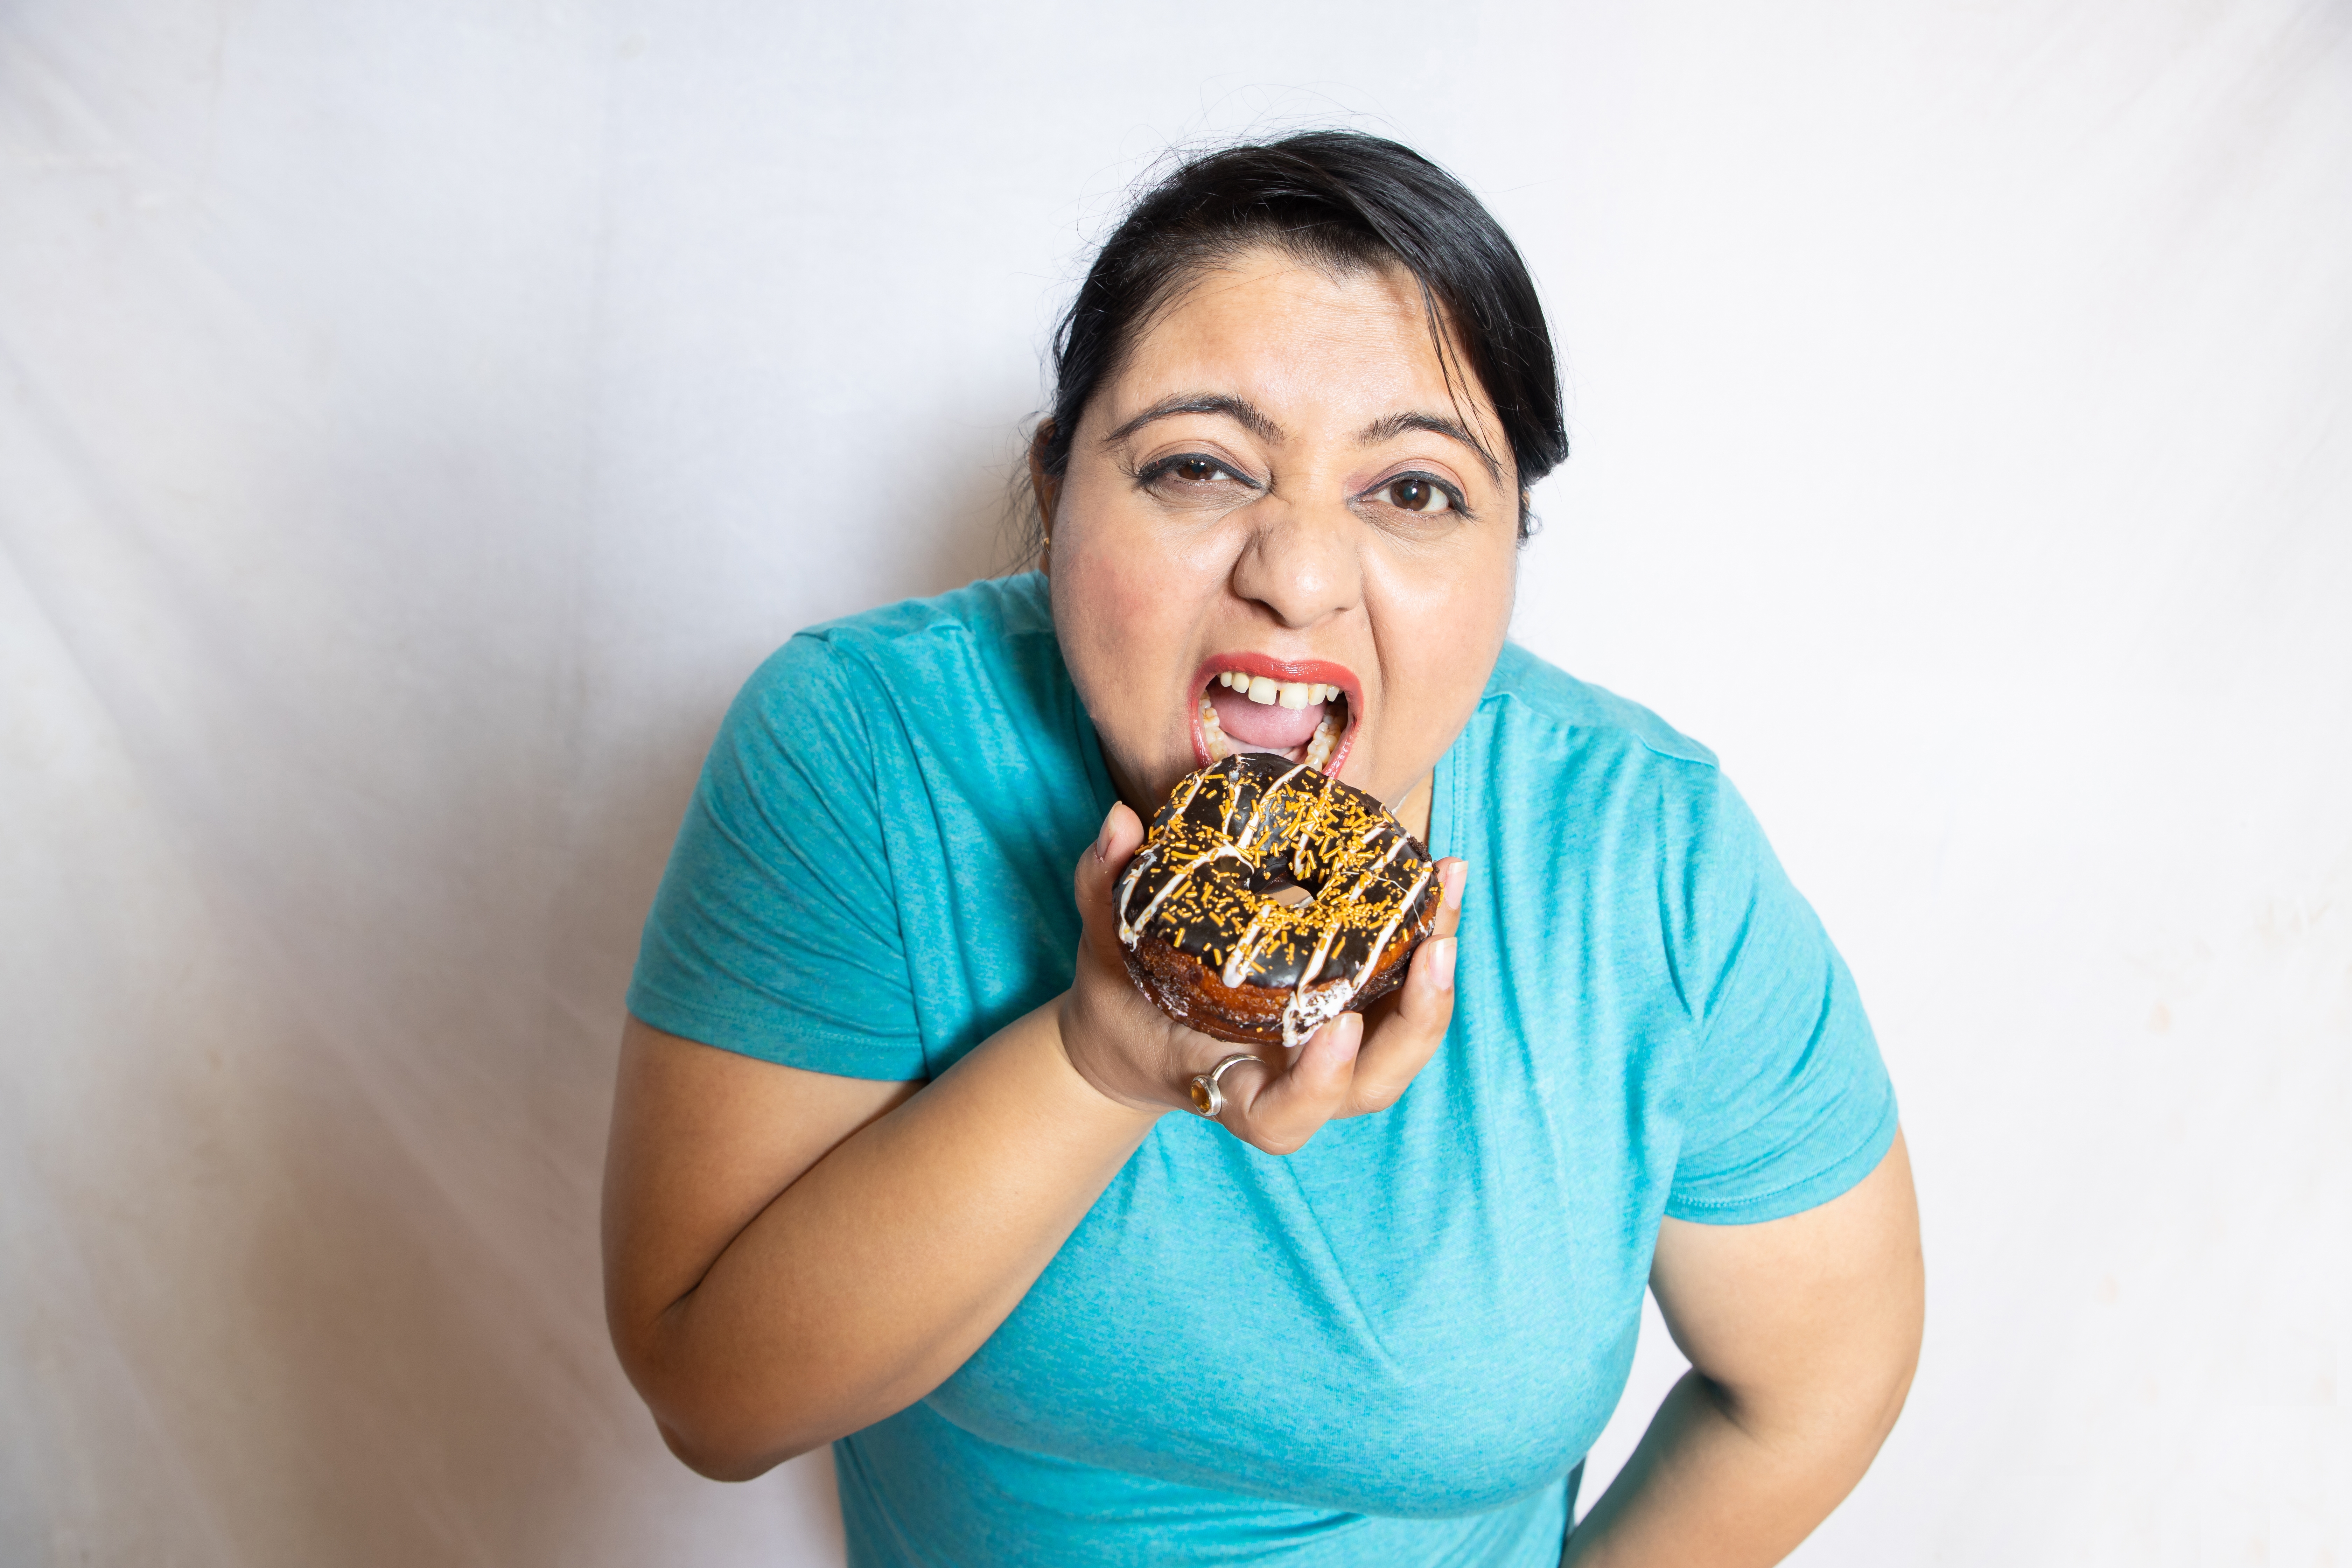 Expert Guide to the Health Risks of Junk Food